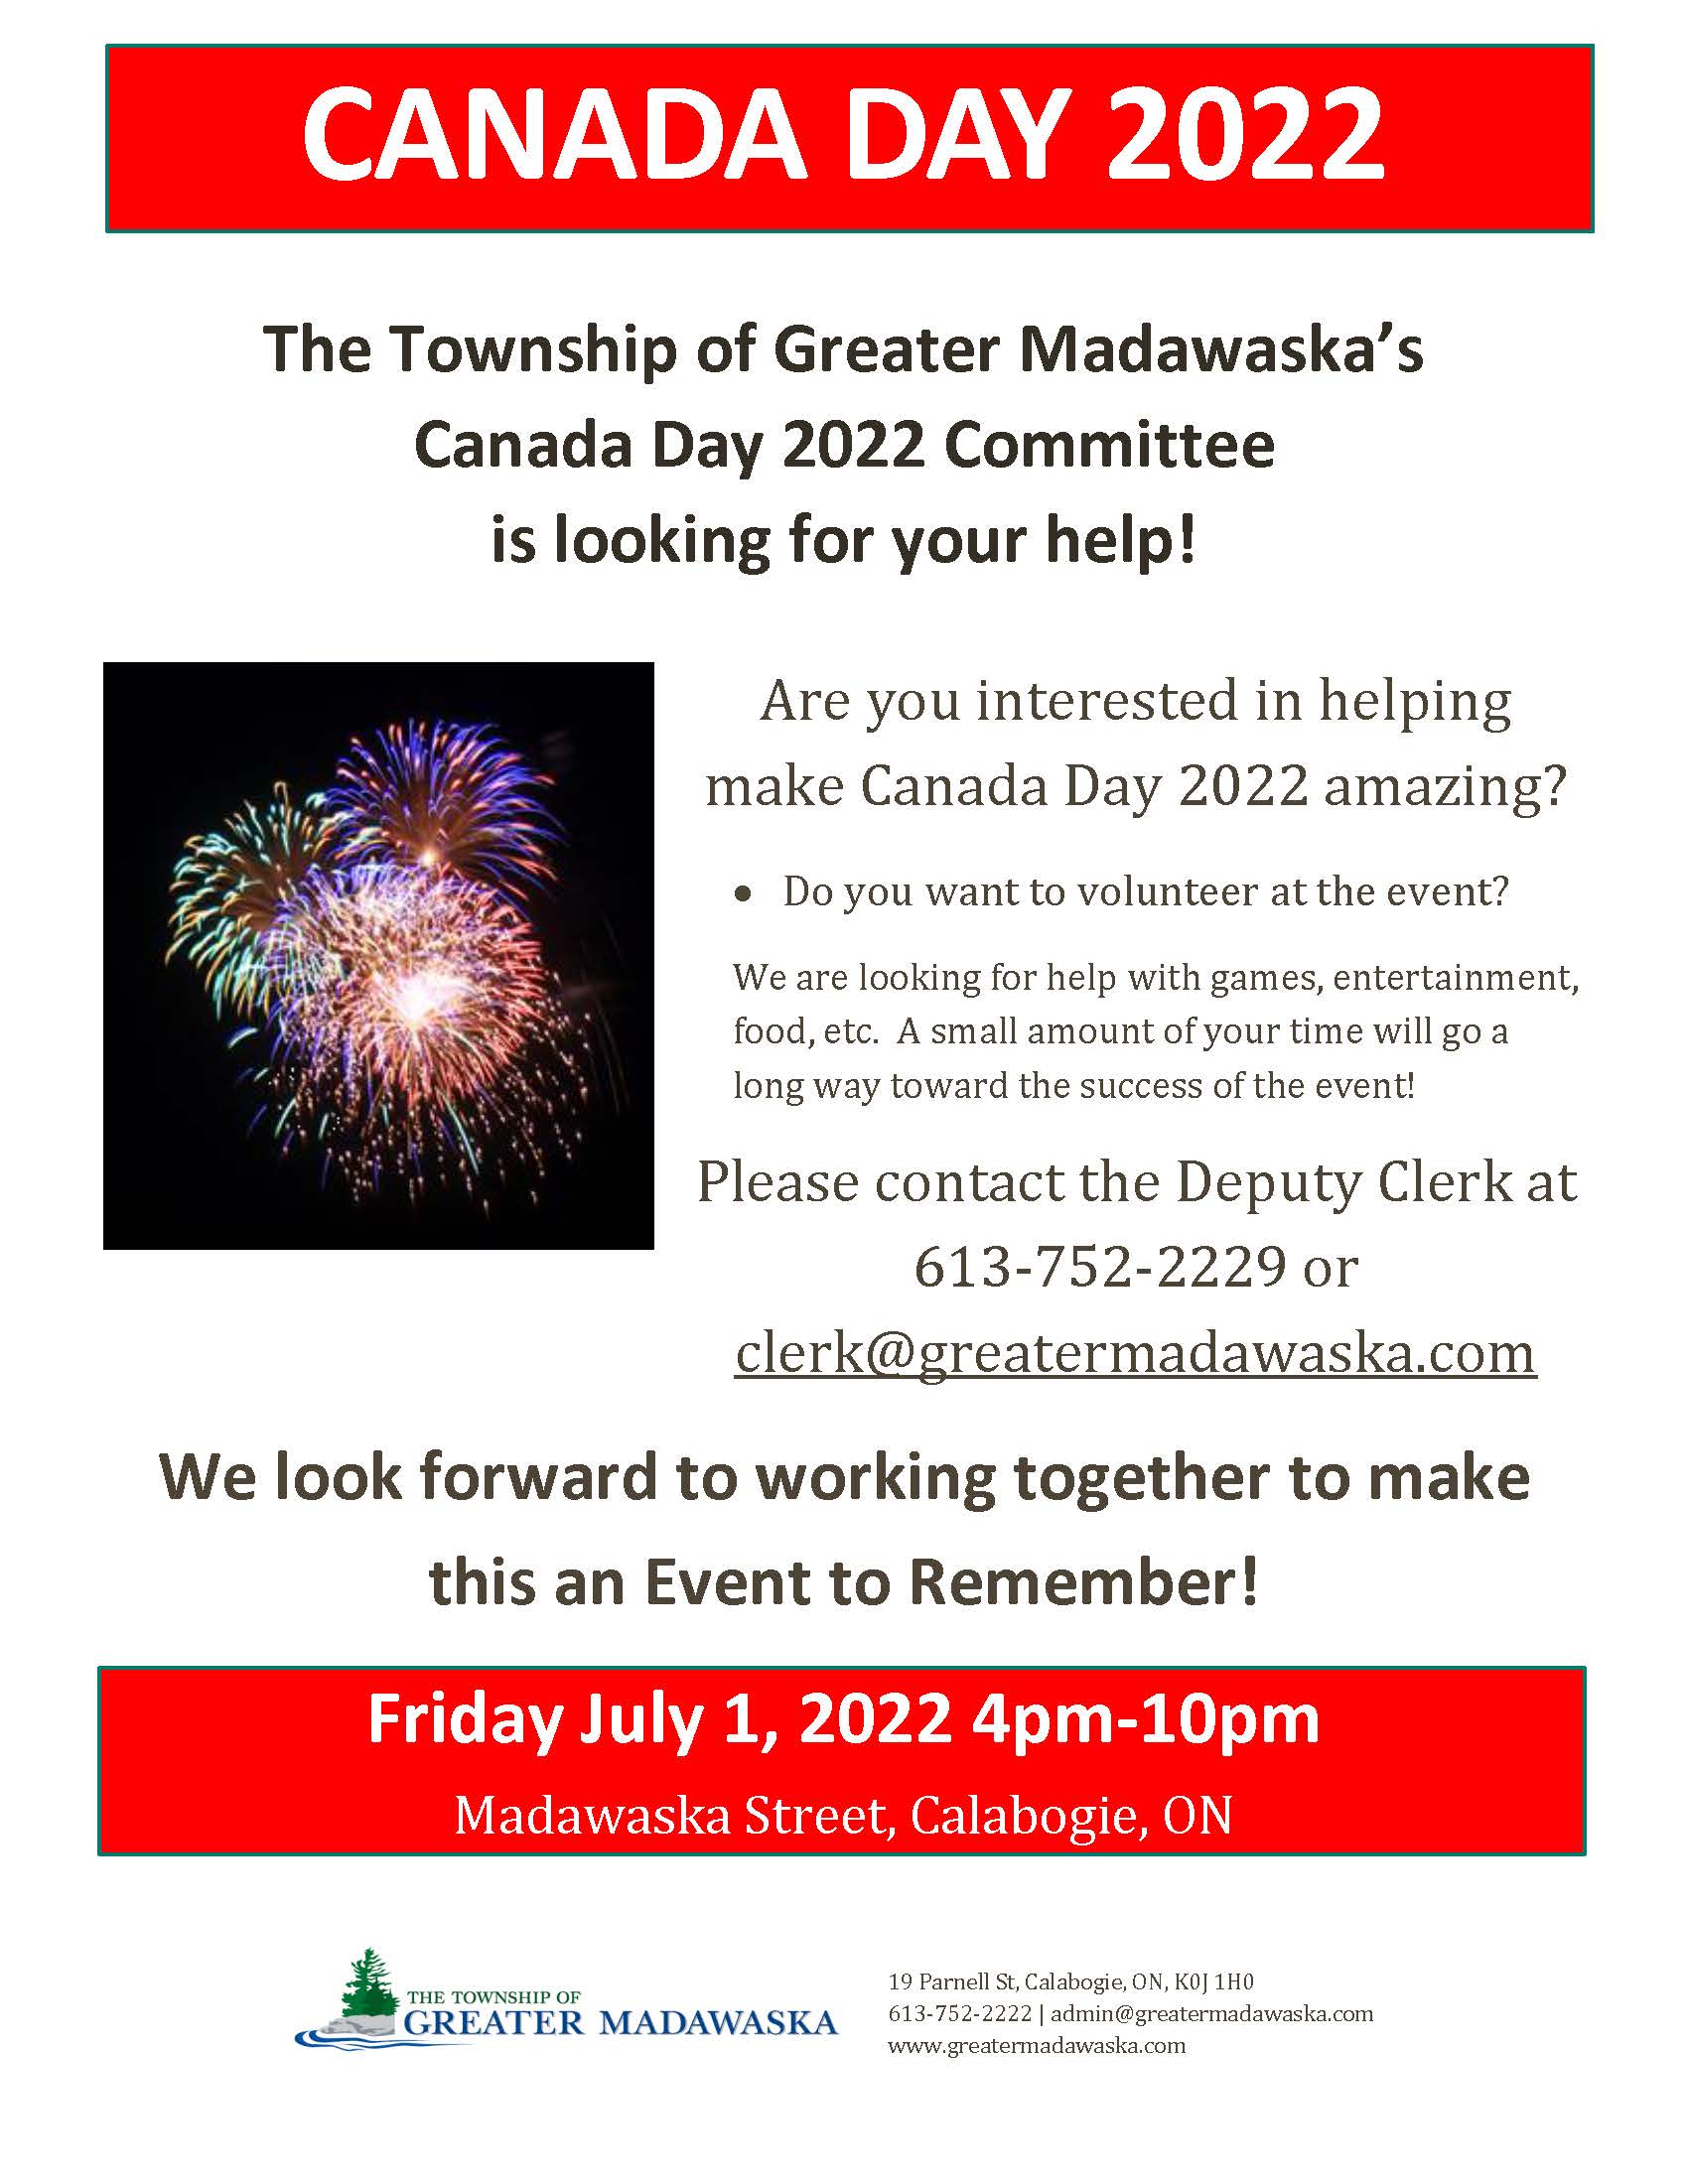 help wanted poster for canada day